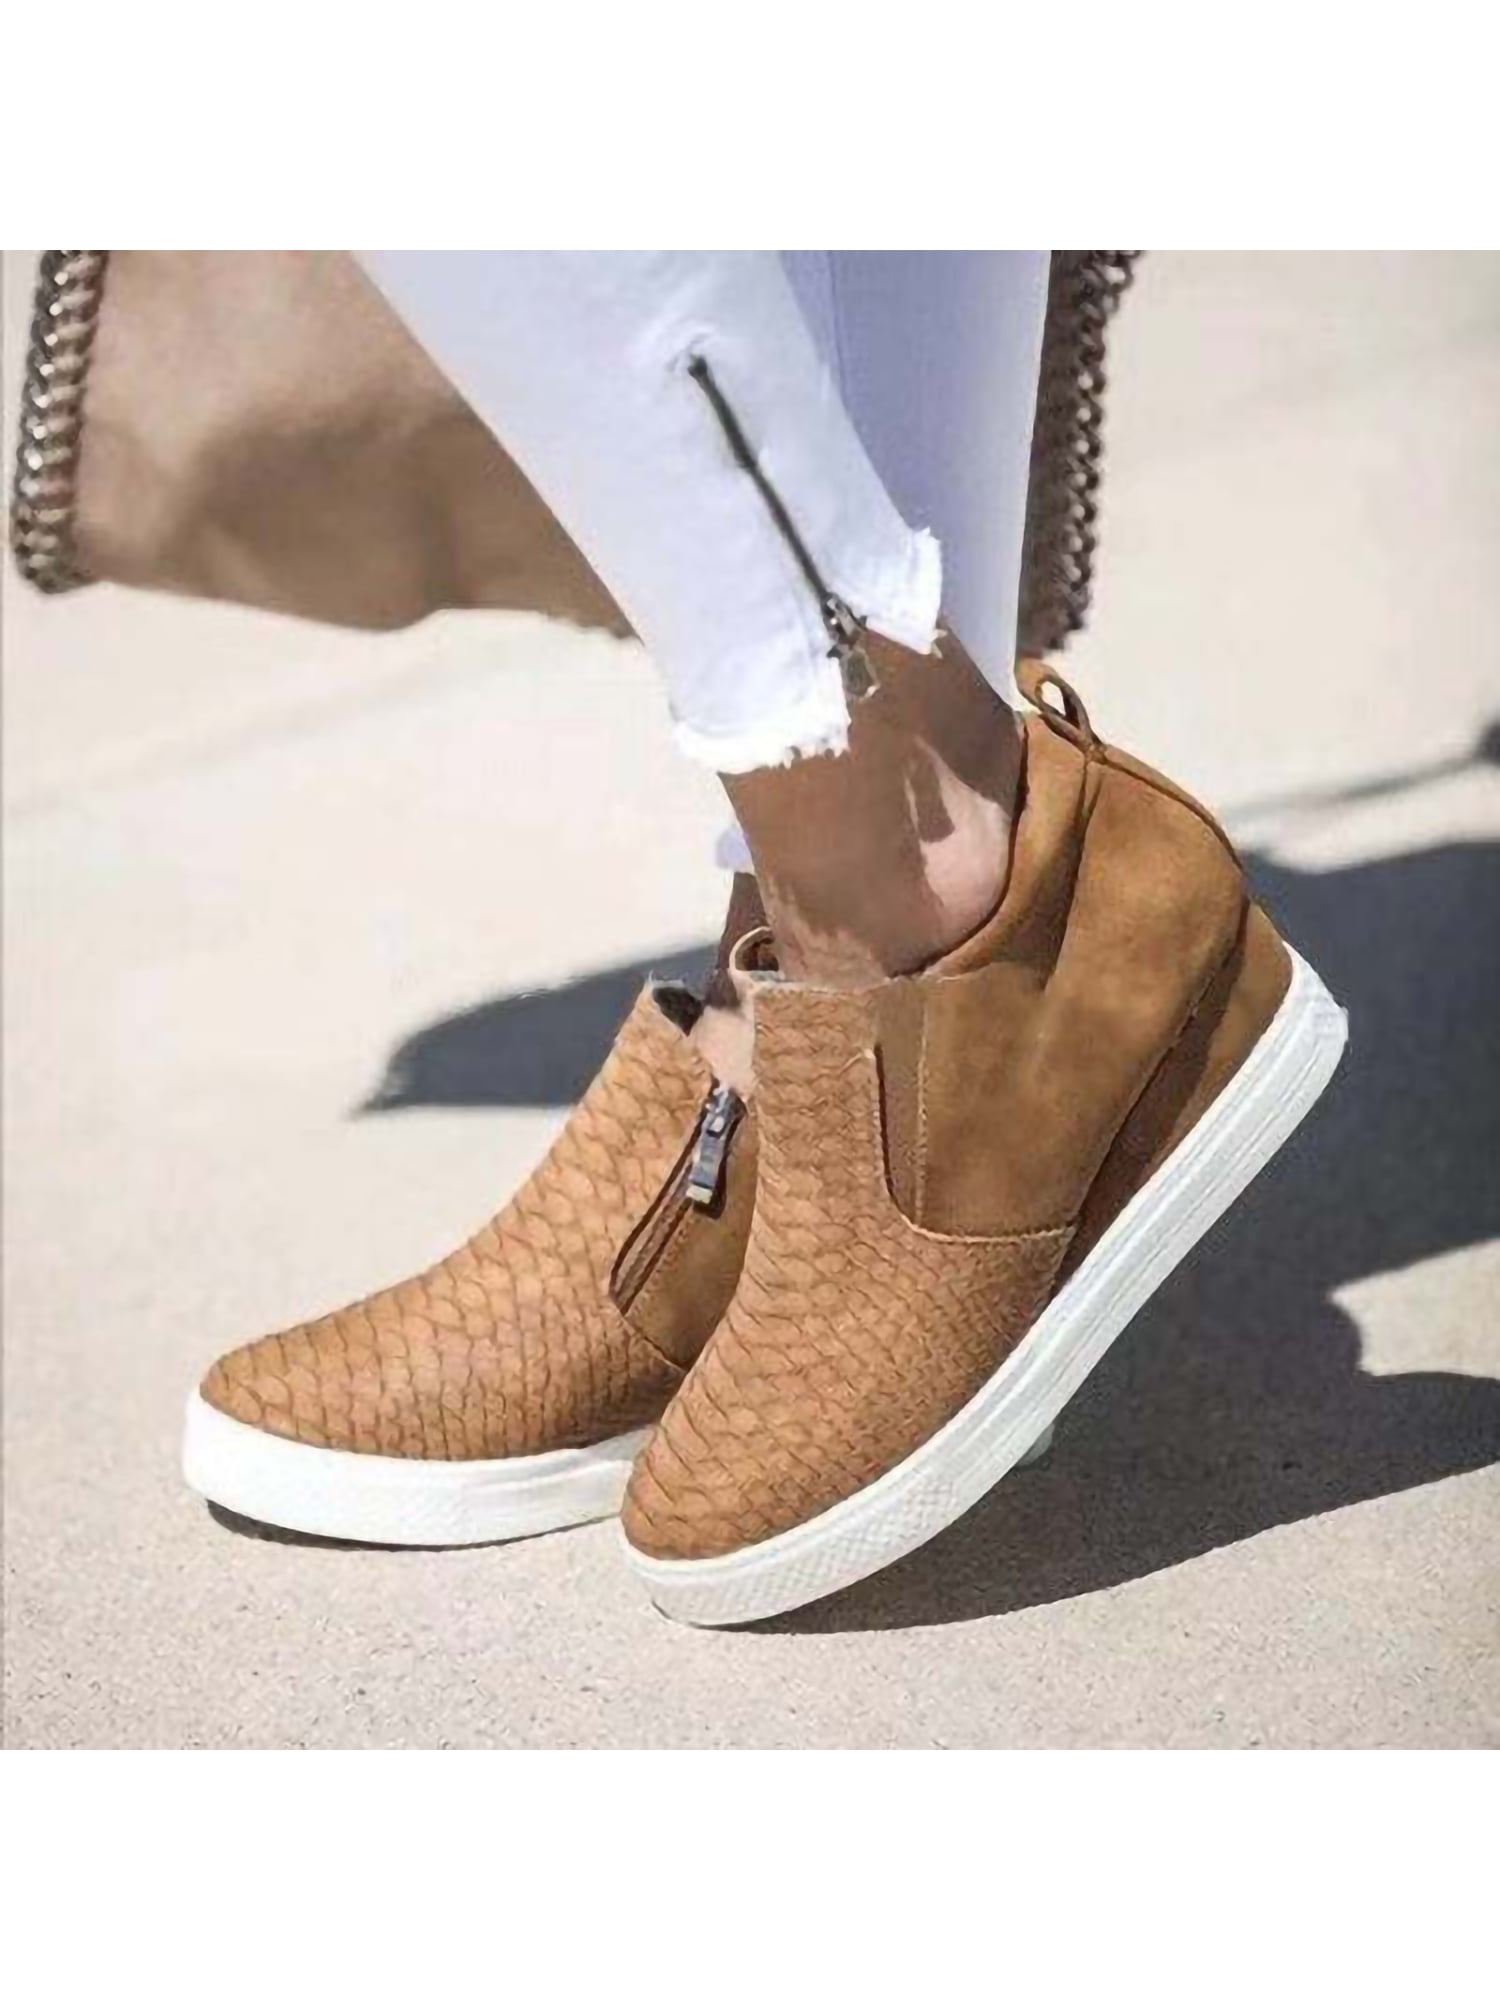 Casual Women's High Top Fashion Sneakers Hidden Wedge Zip Athletic Dance Shoes 